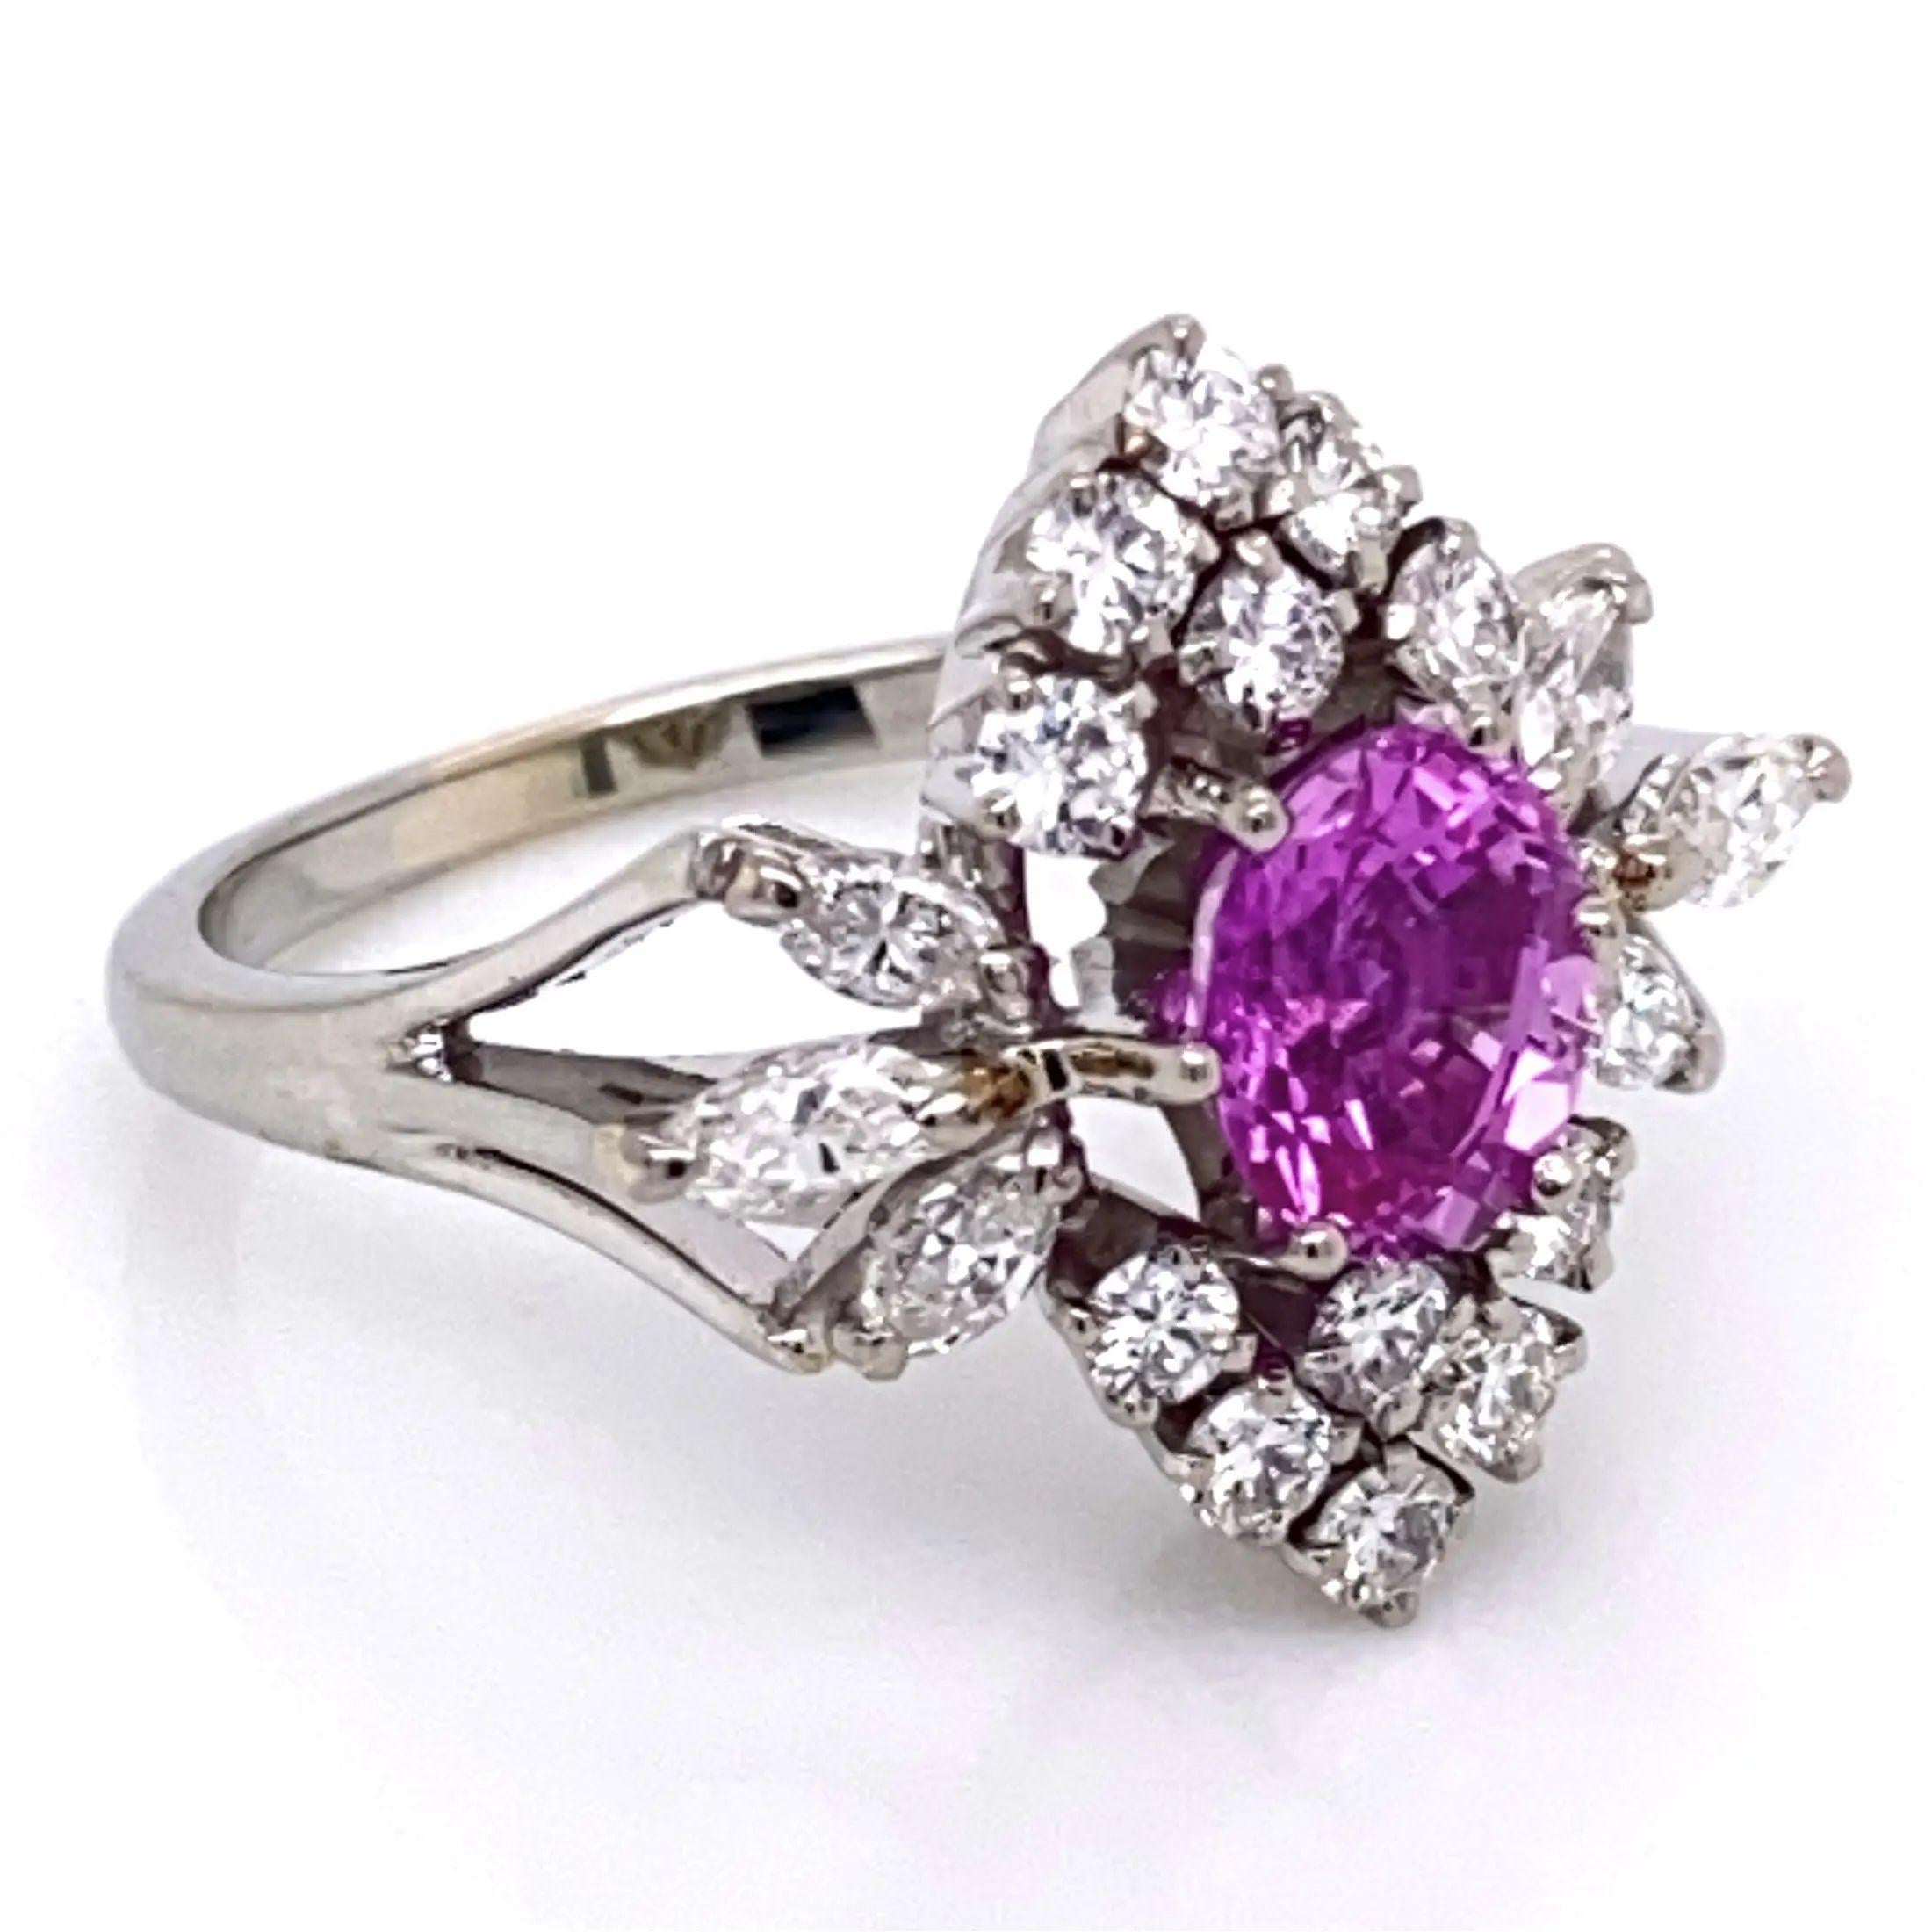 Simply Beautiful Vintage Retro Mid Century Modern Pink Sapphire and Diamond Gold Cocktail Ring. Centering a securely nestled Hand set Pink Sapphire weighing 1.25 Carat. Surrounded by Diamonds weighing approx. 0.90tcw. Hand crafted 18K White Gold